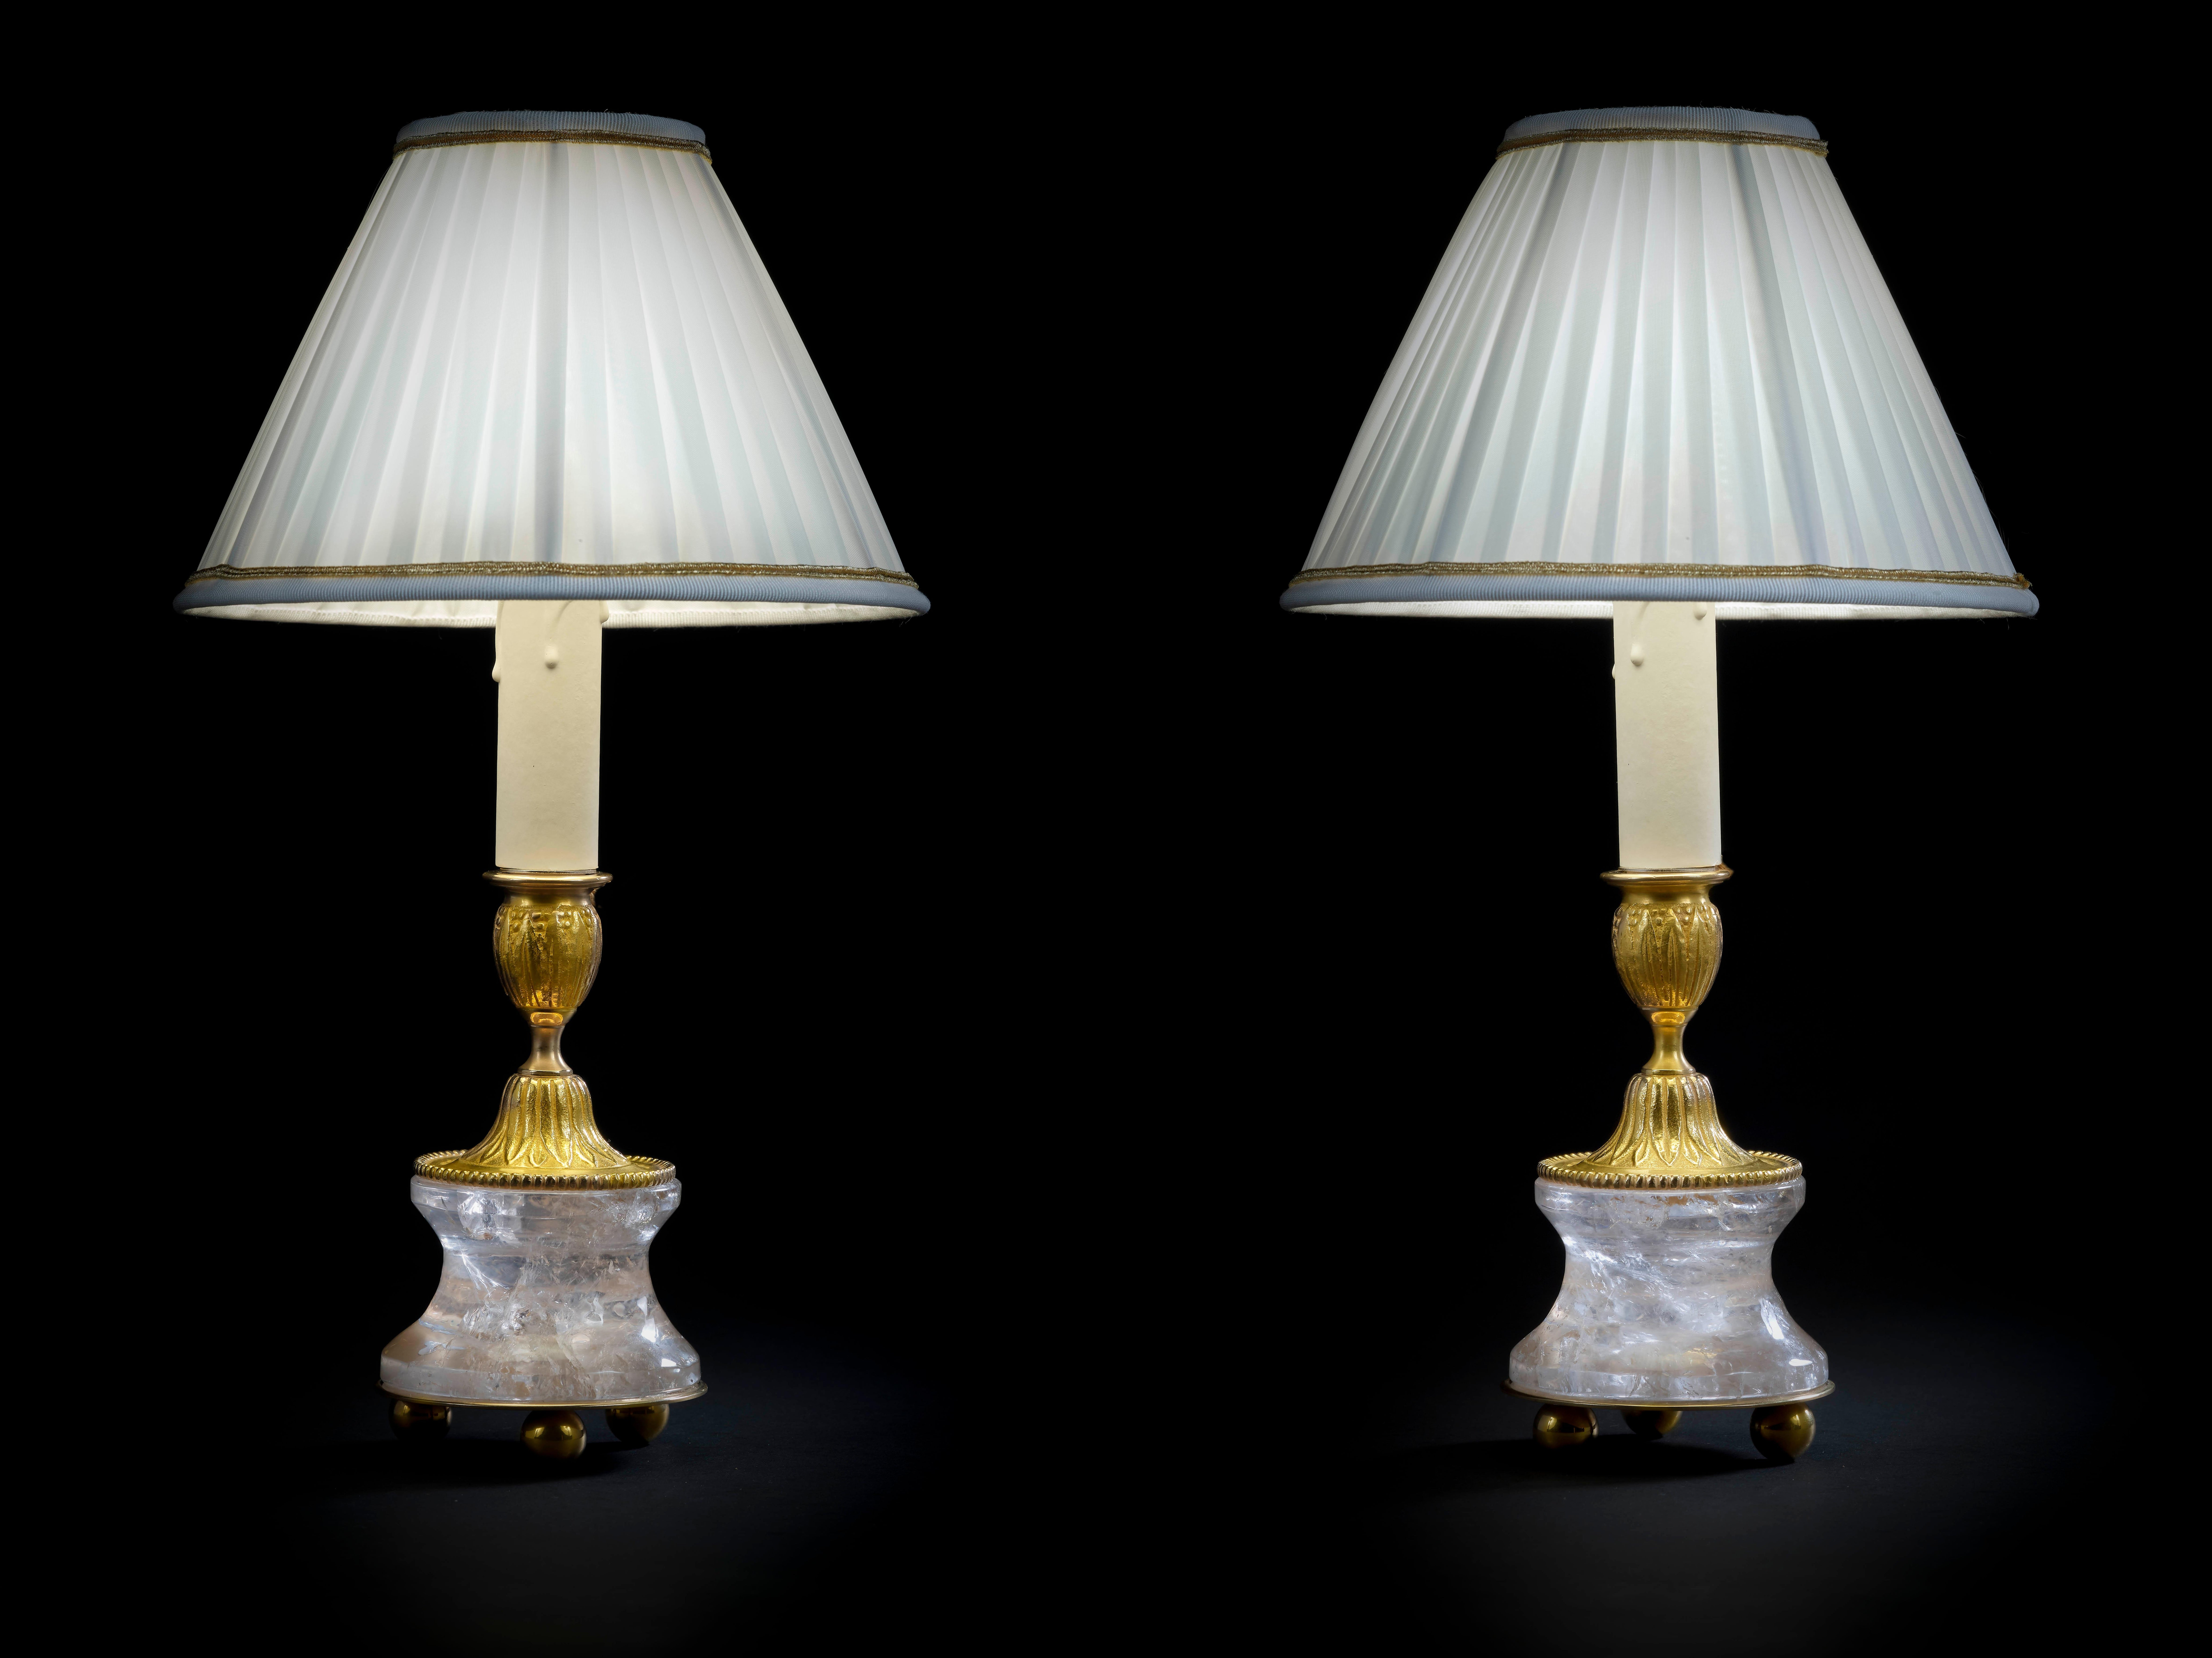 Rock crystal lamps by Alexandre Vossion.
Model II, Louis XVIth style.
Rock crystal polished and carved stone, bronze, 24-karat gilding, customized lampshade.
Two in ones: You can easily used as a pair of candlesticks on your dining table but also